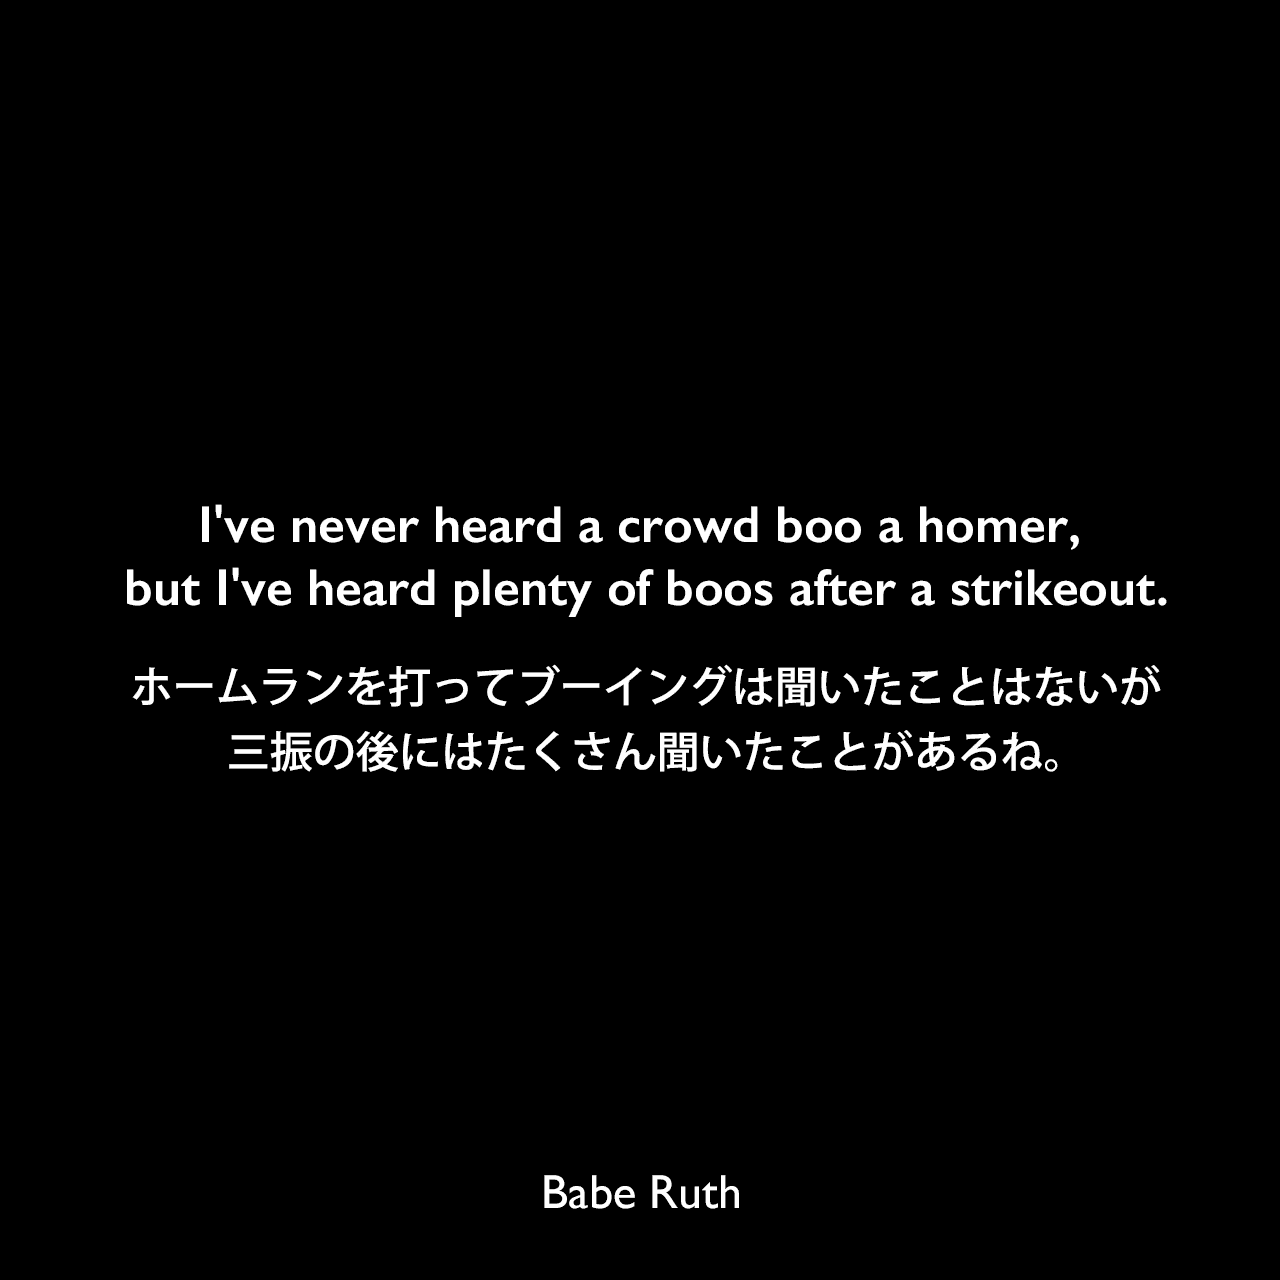 I've never heard a crowd boo a homer, but I've heard plenty of boos after a strikeout.ホームランを打ってブーイングは聞いたことはないが、三振の後にはたくさん聞いたことがあるね。Babe Ruth